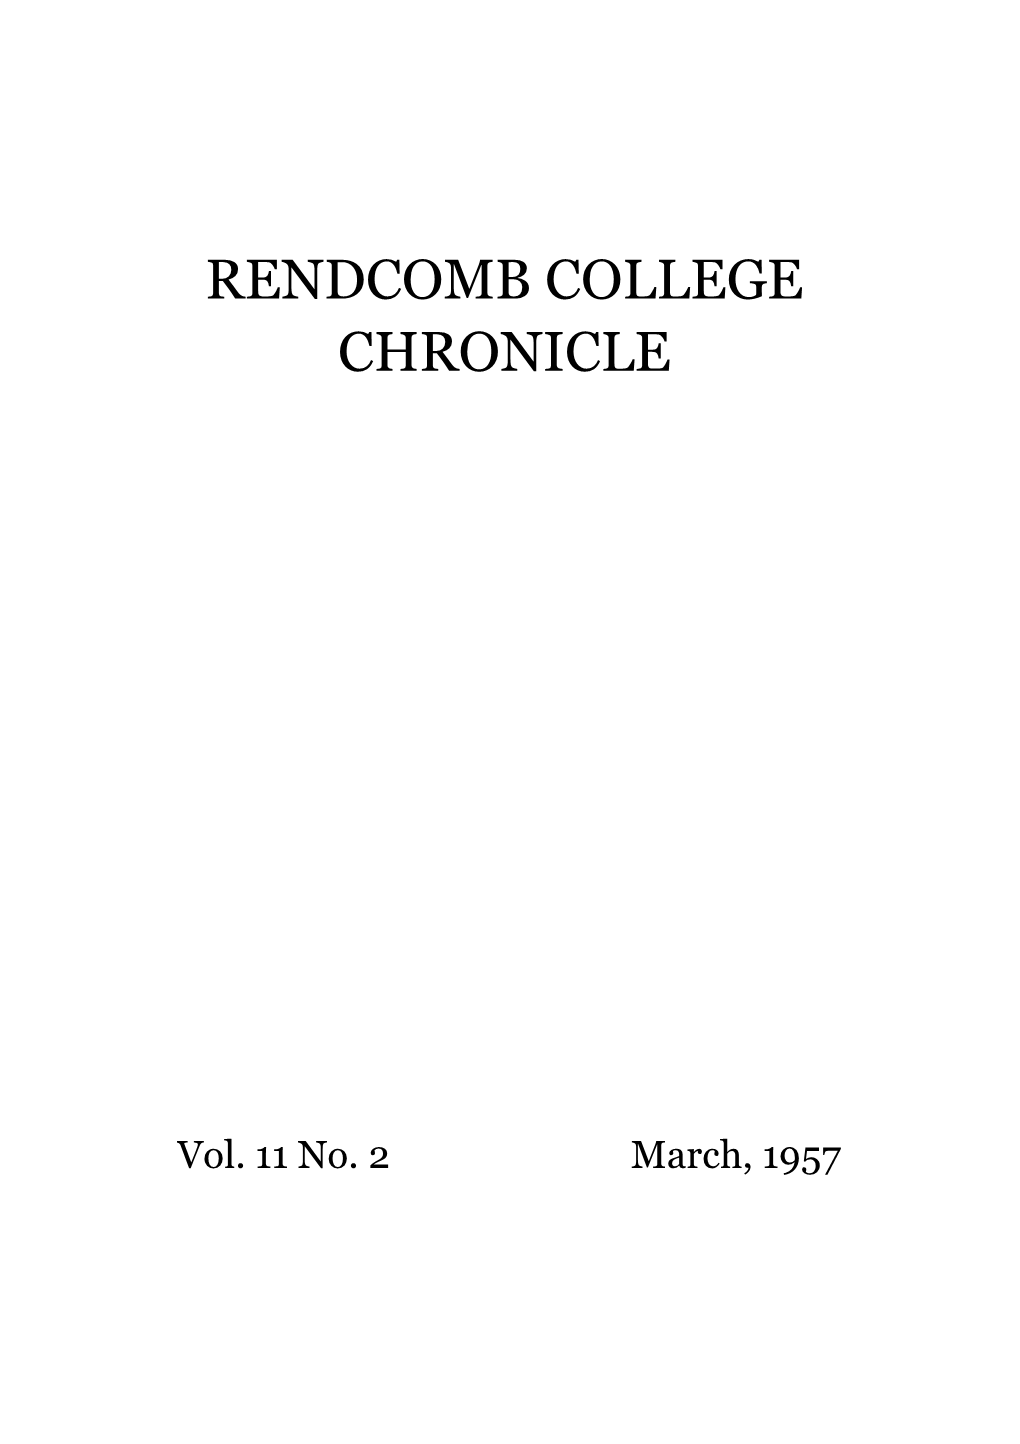 Rendcomb College Chronicle March 1957